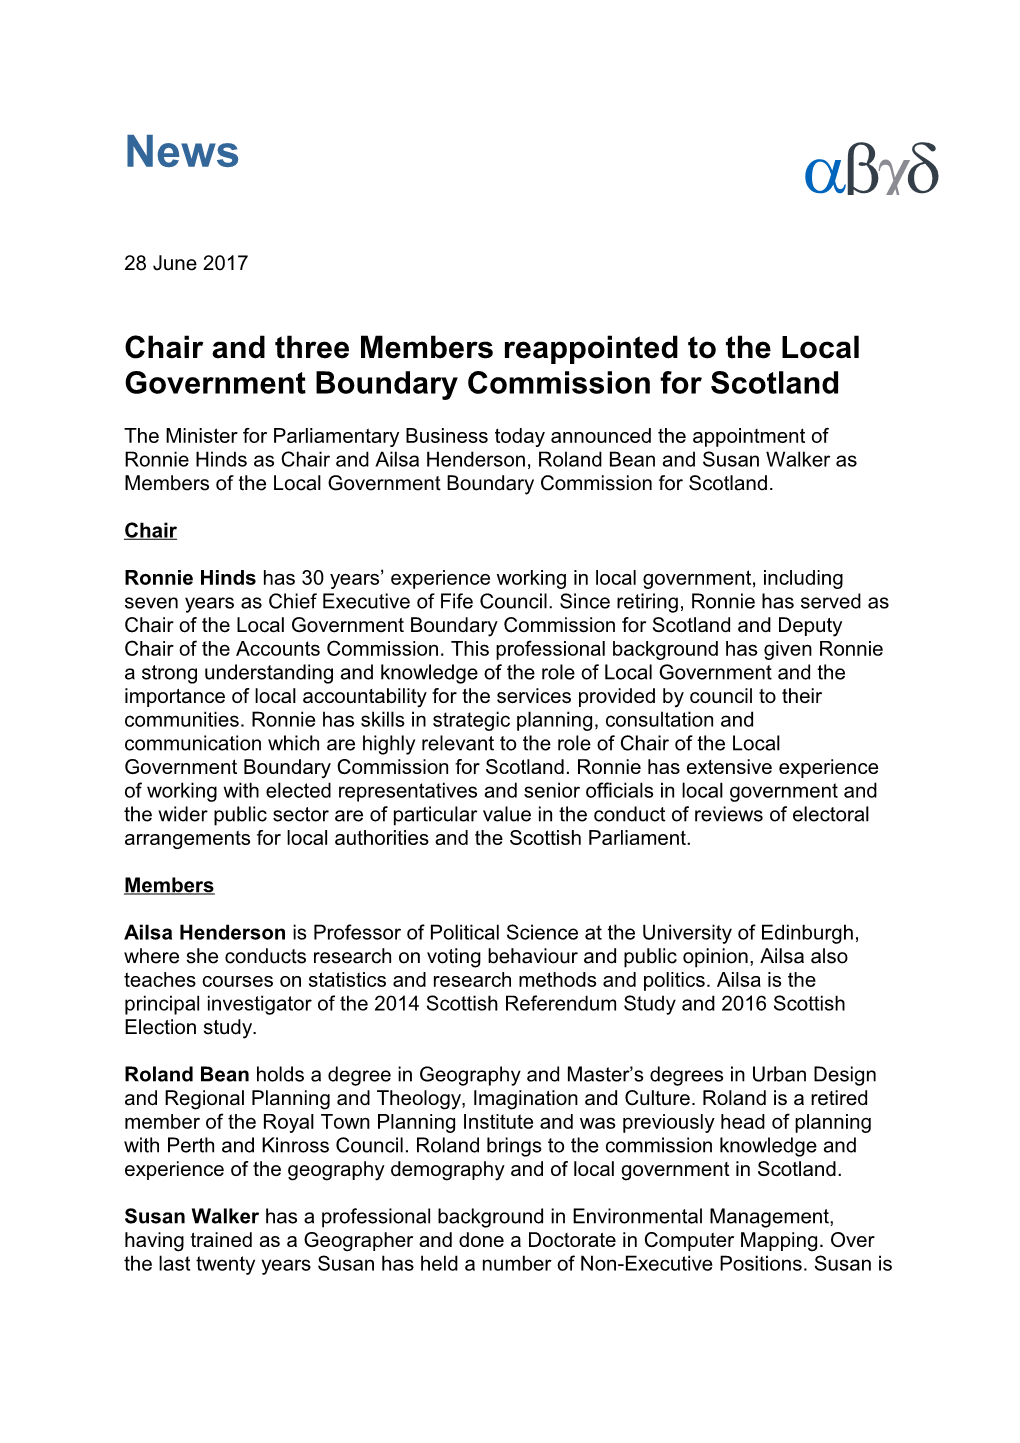 Chair and Three Members Reappointed to the Local Government Boundary Commission for Scotland